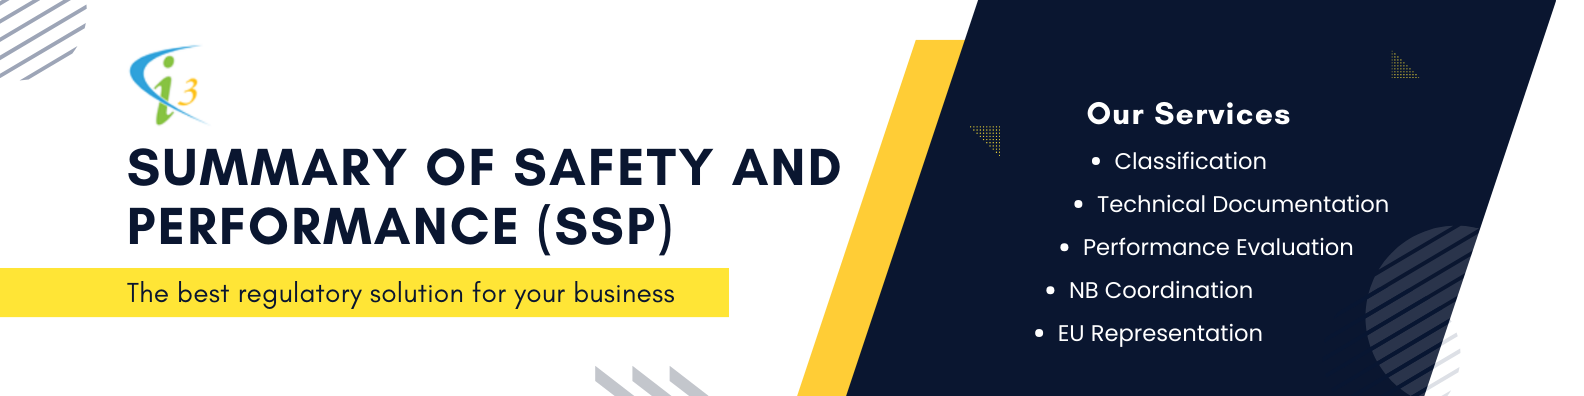 Summary of Safety and Performance SSP